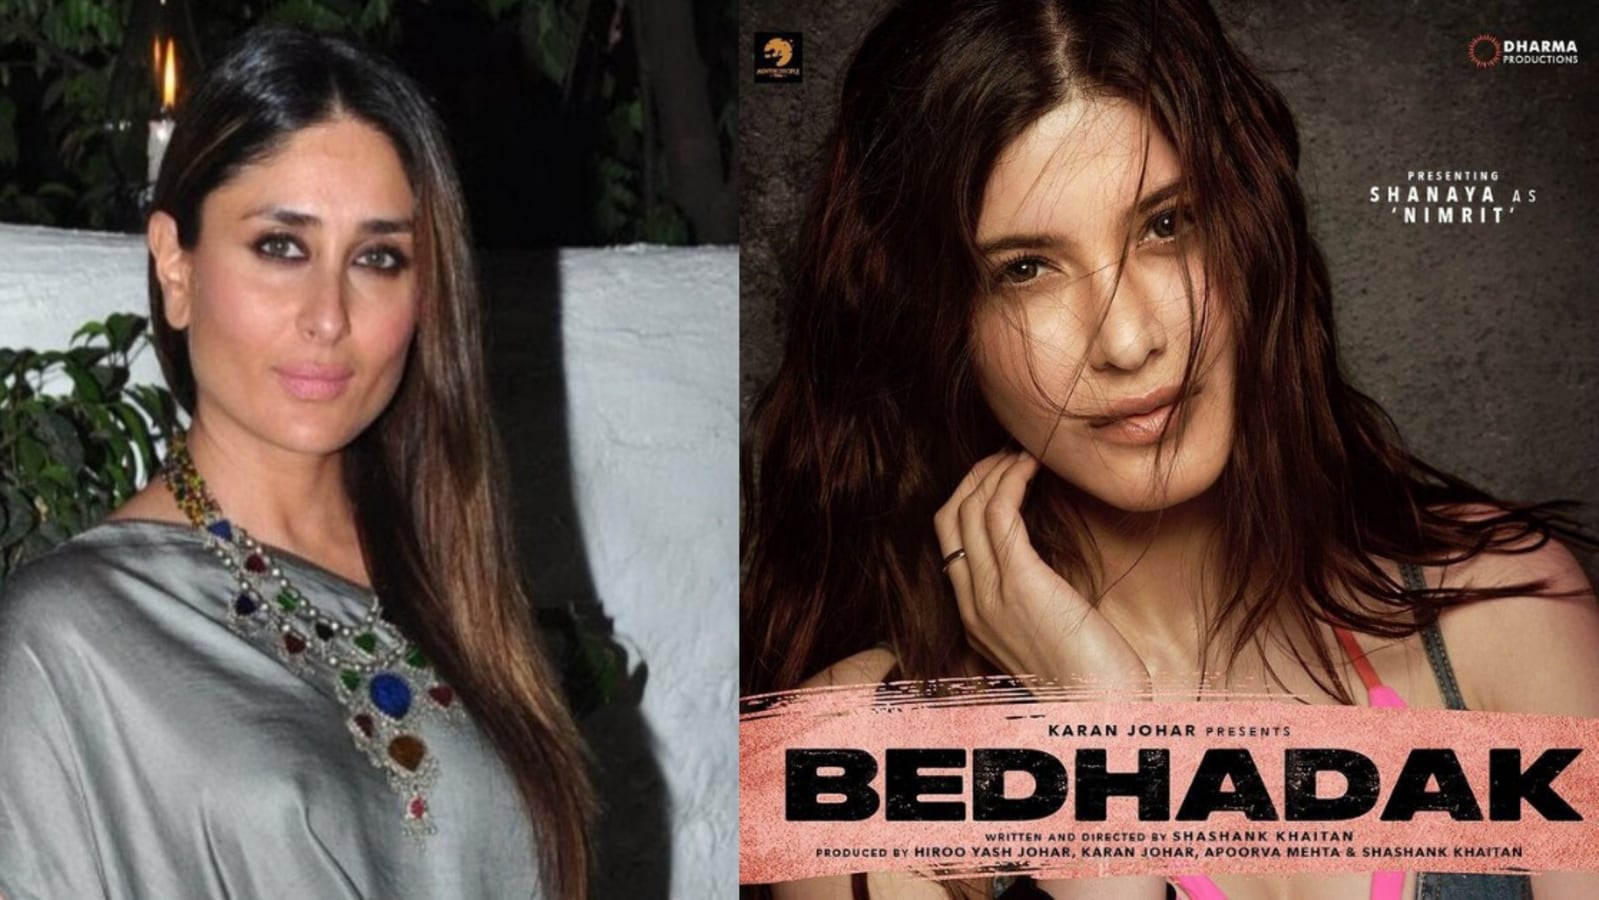 Kareena Kapoor gives her approval to Shanaya Kapoor’s Bedhadak posters: ‘She’s looking lovely’